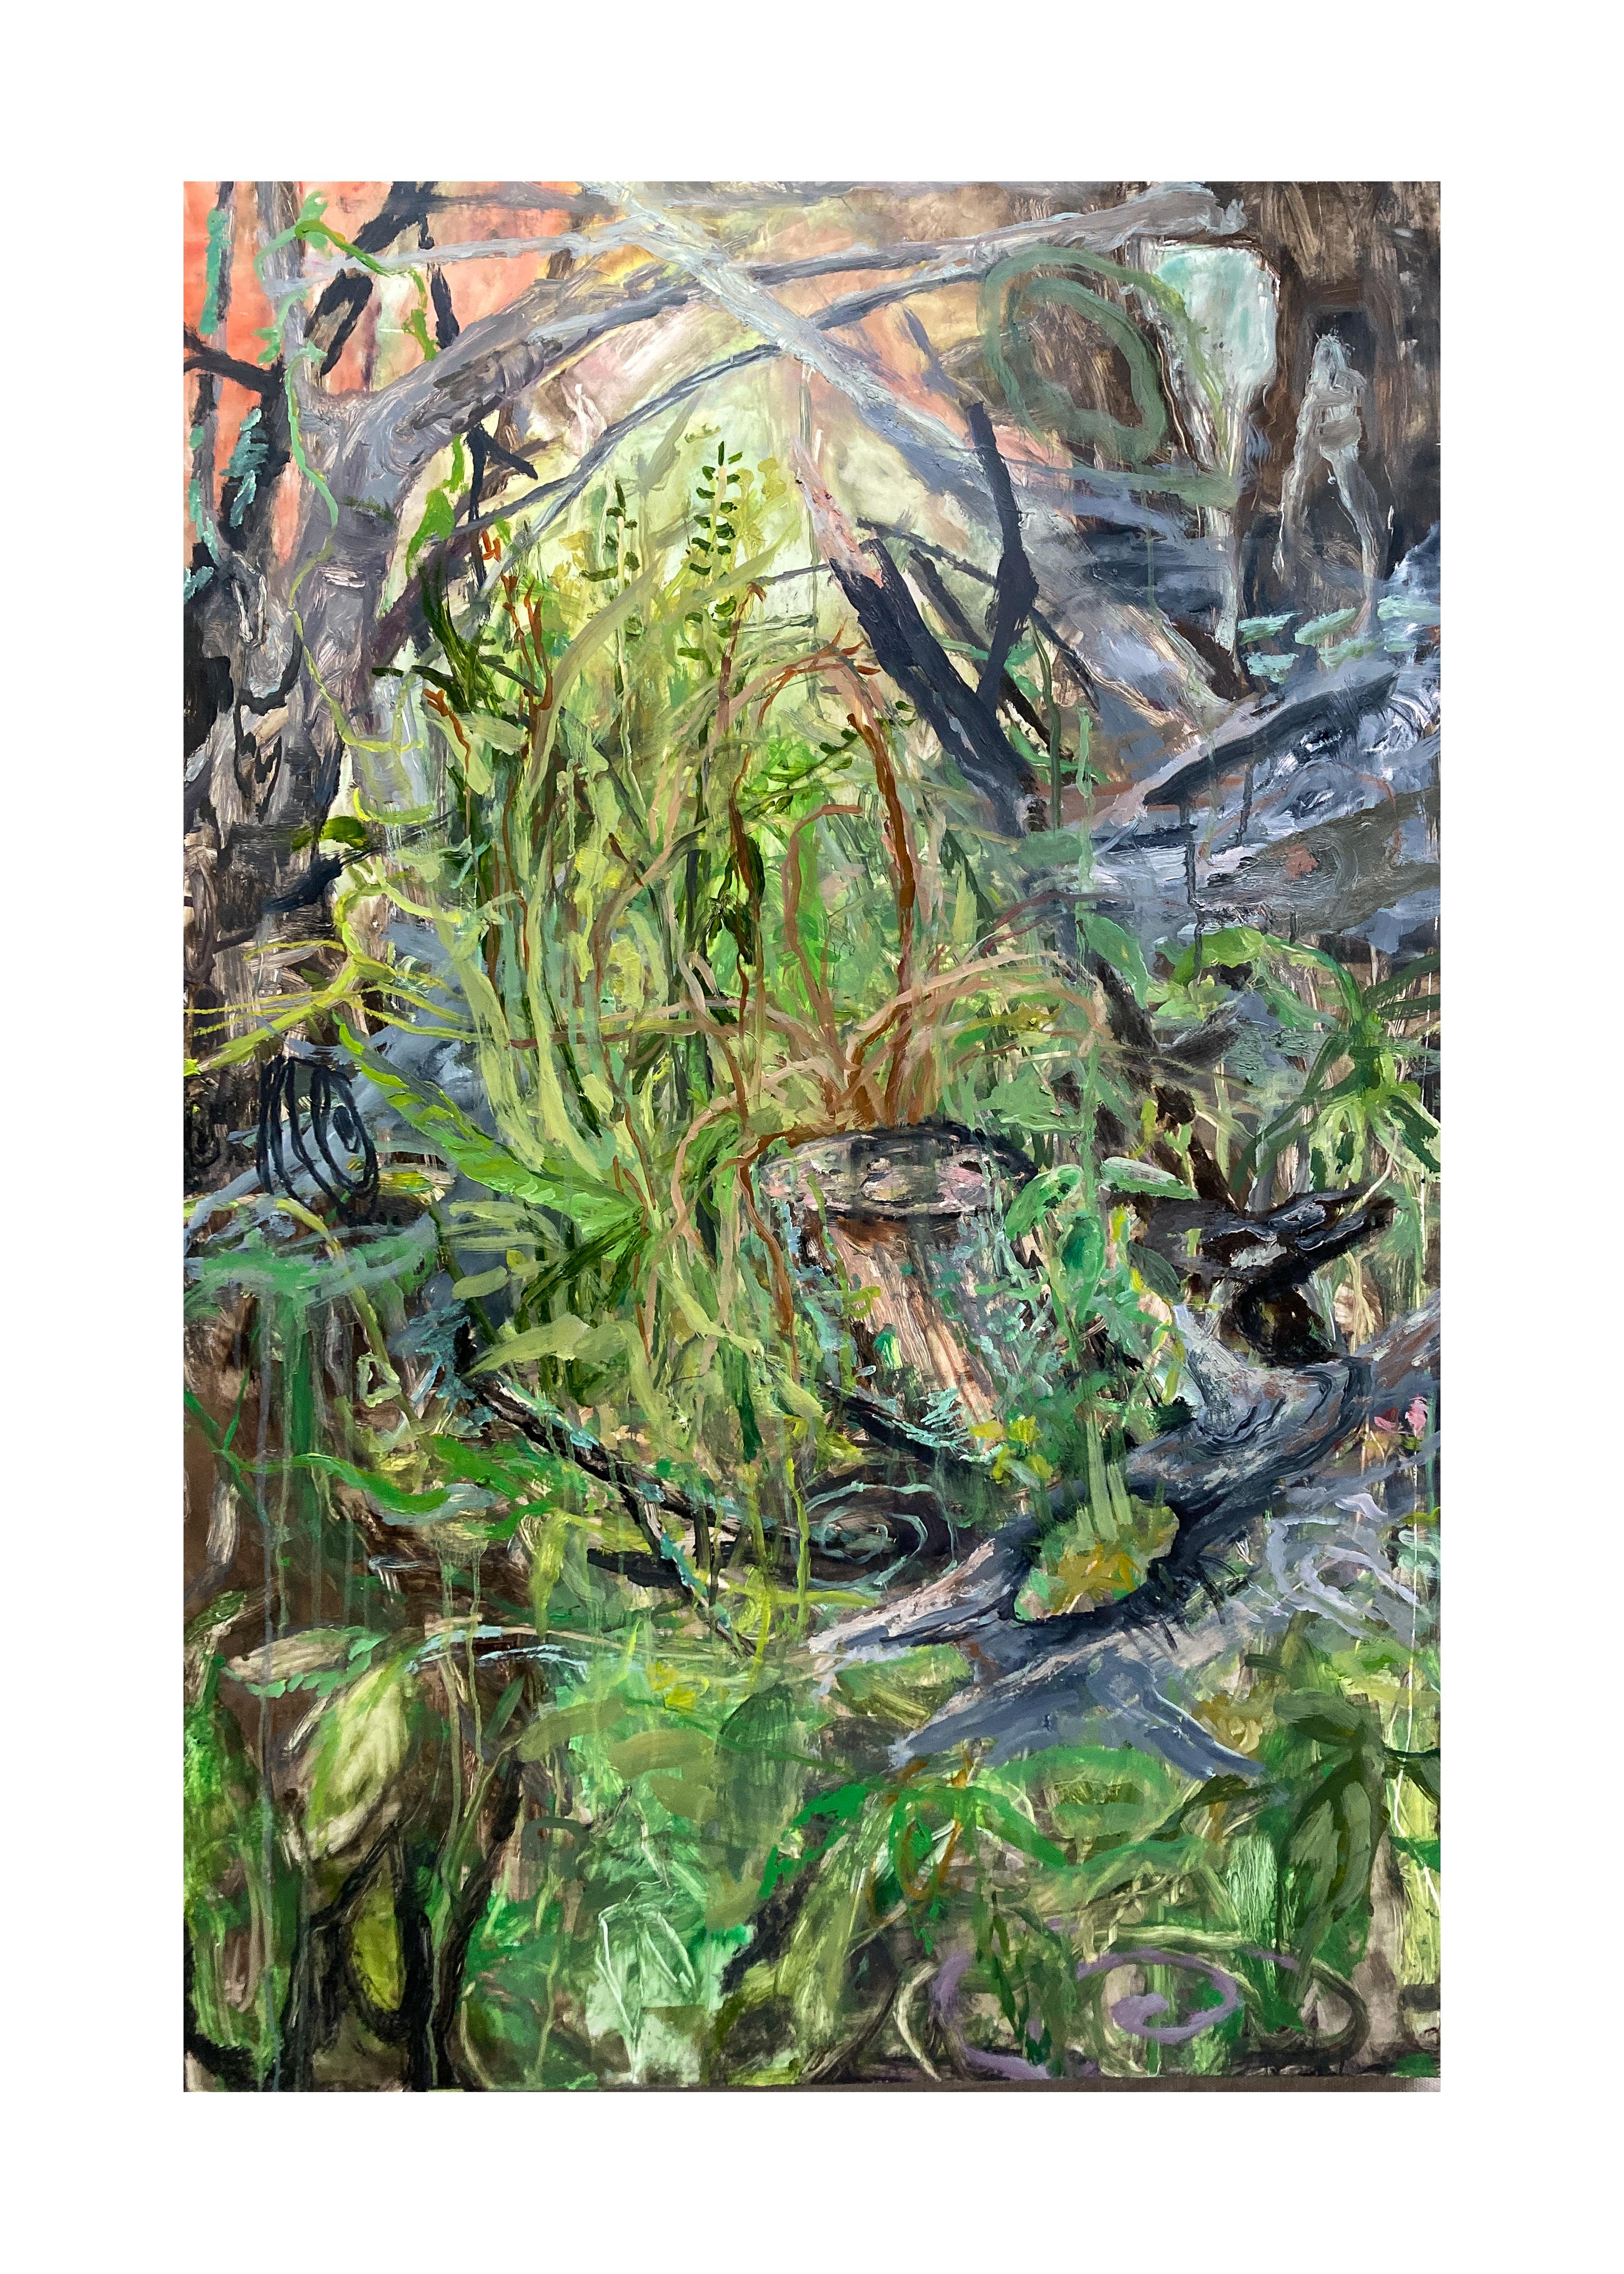 WASHINGTON DISAPPEARING - Oil on Yupo Panel Painting of Plant Life in the Forest